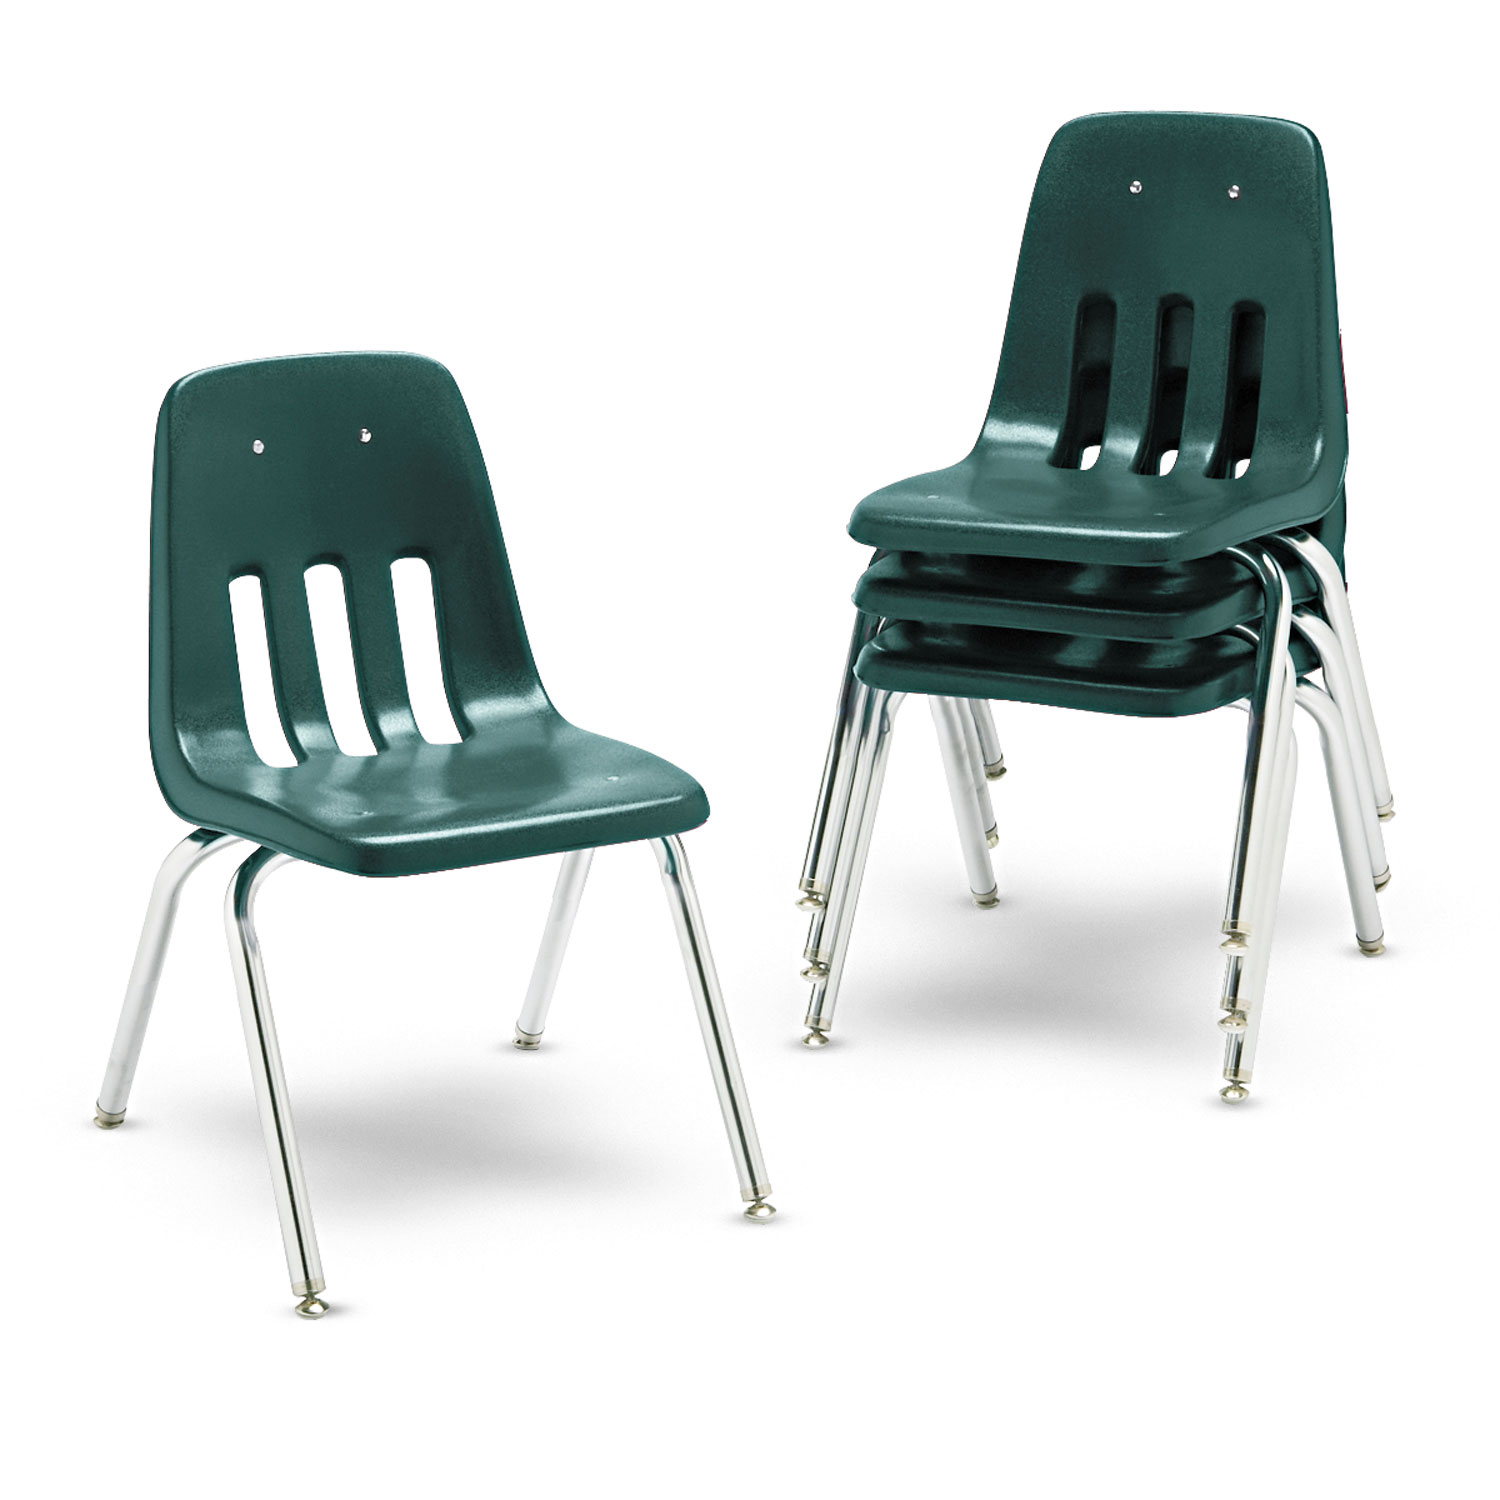 9000 Series Classroom Chairs, 16 Seat Height, Forest Green/Chrome, 4/Carton